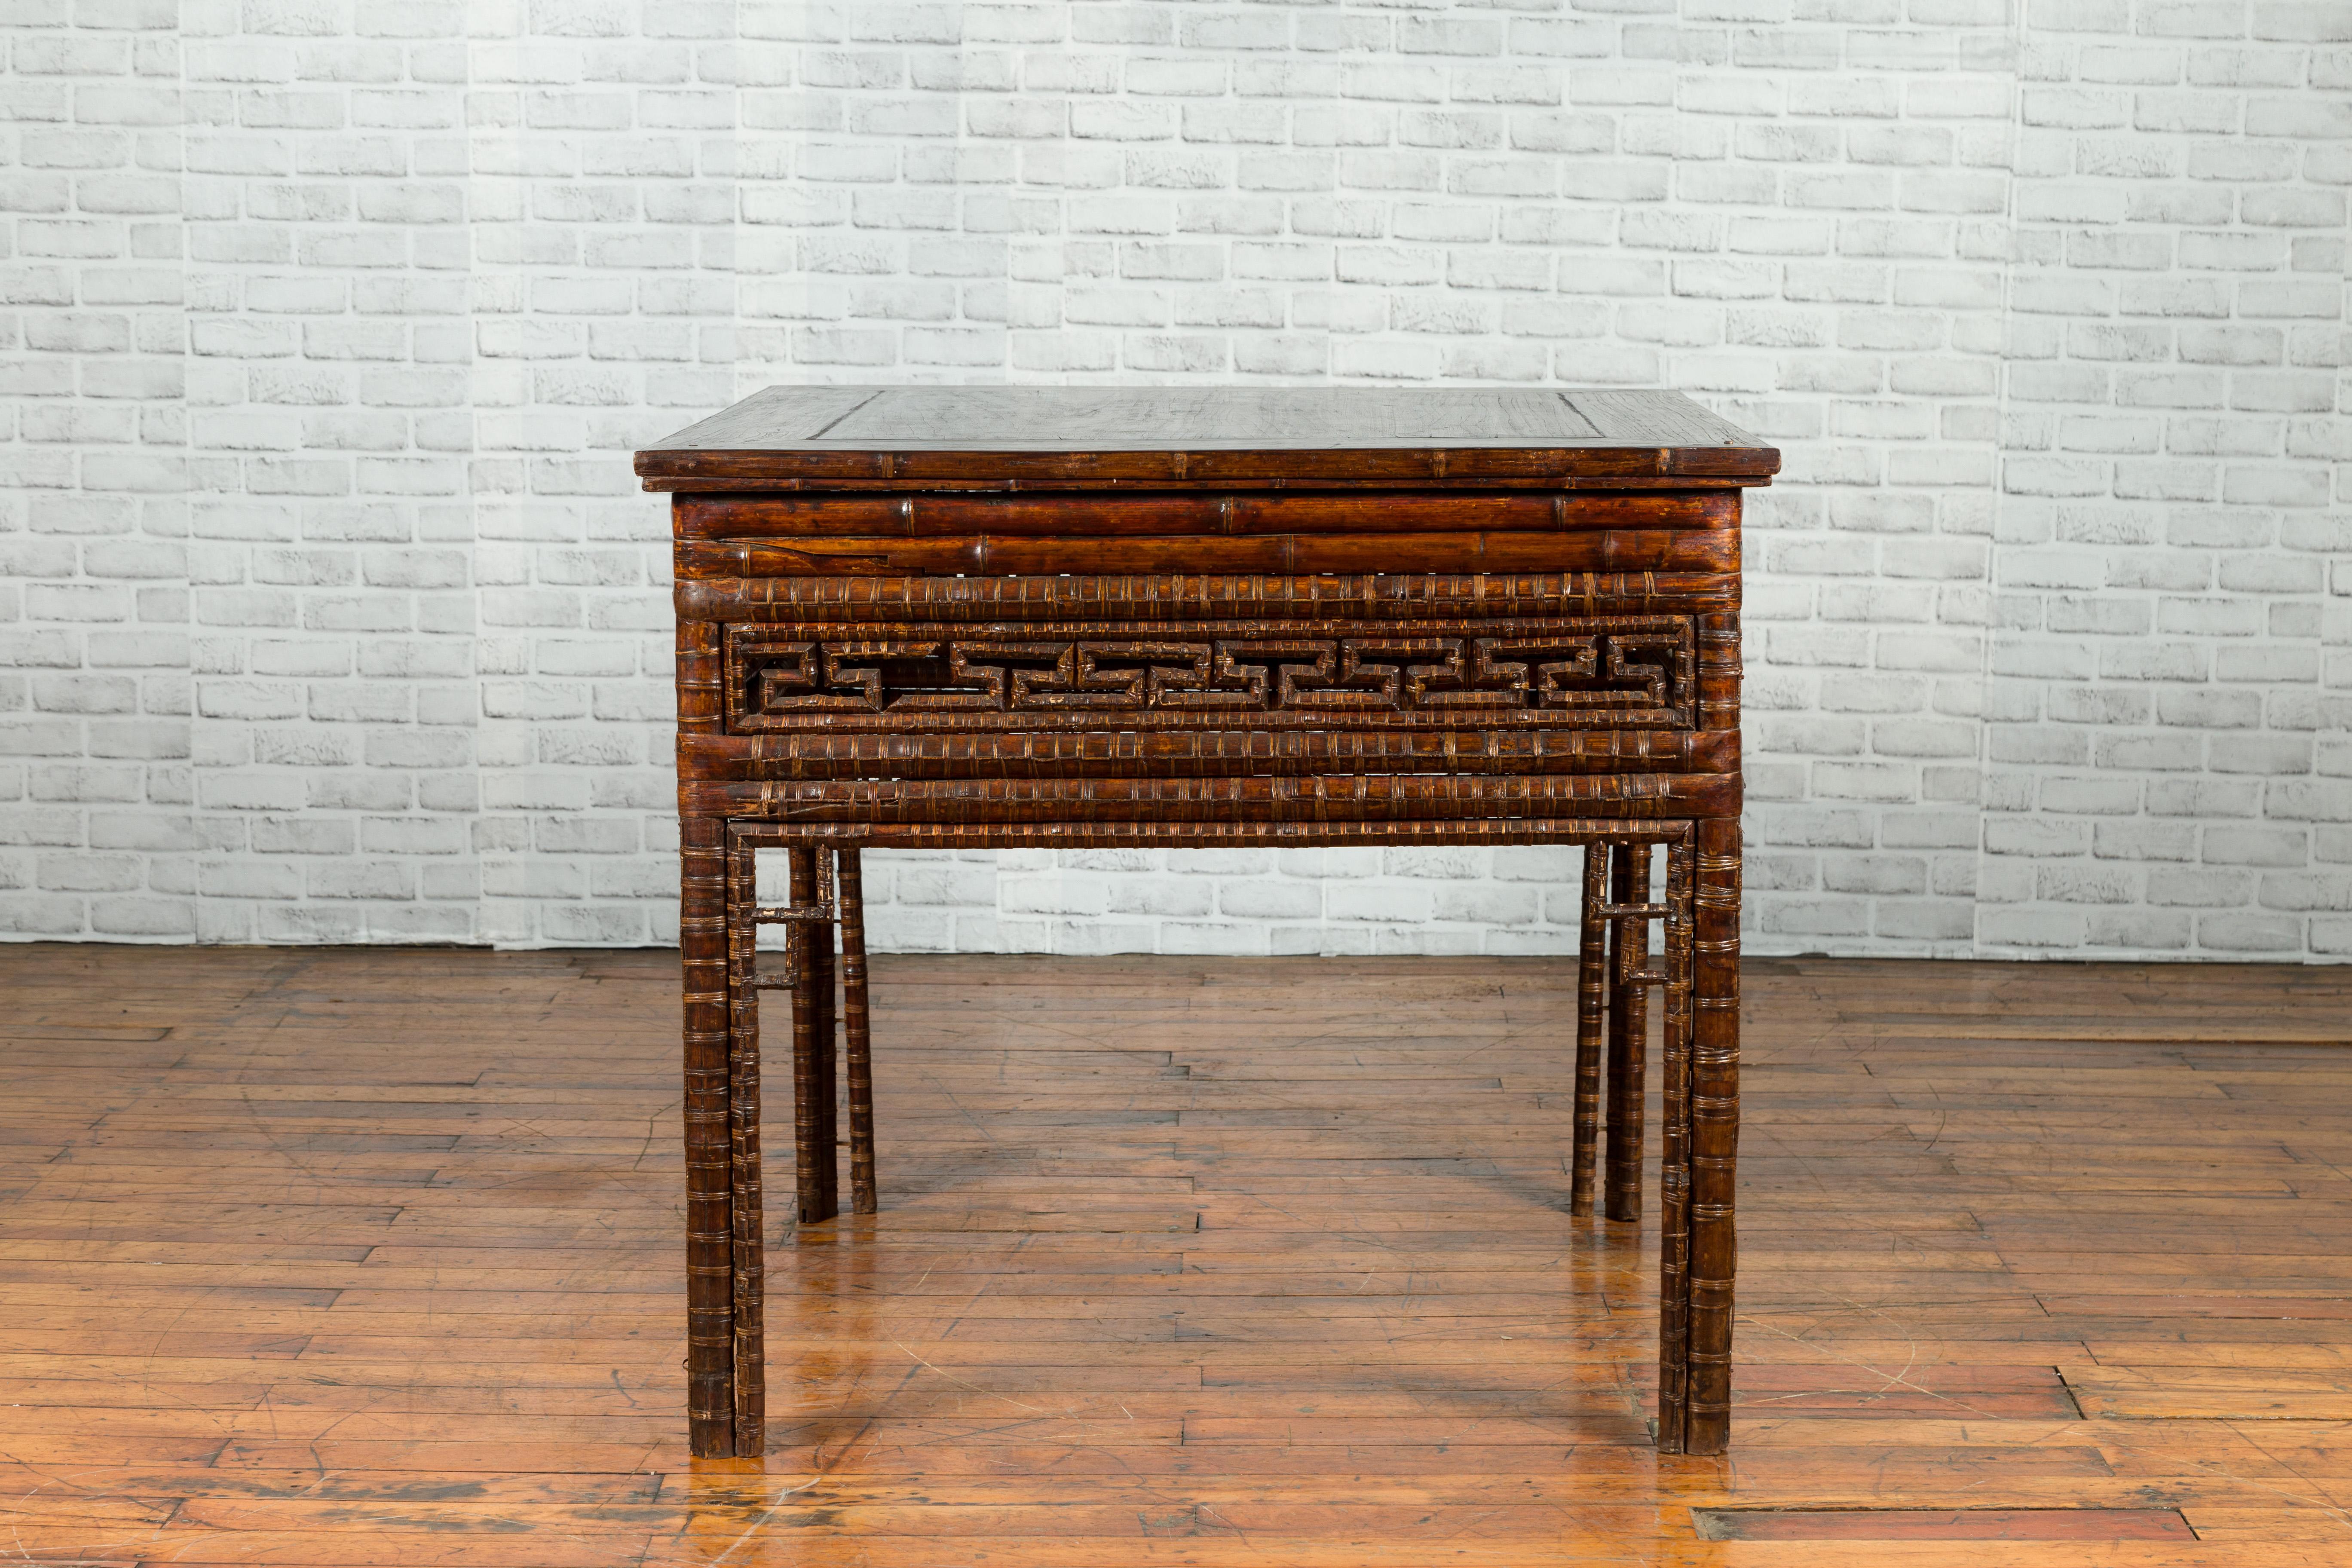 Chinese Qing Dynasty Period 19th Century Bamboo Hall Table with Fretwork Motifs For Sale 9